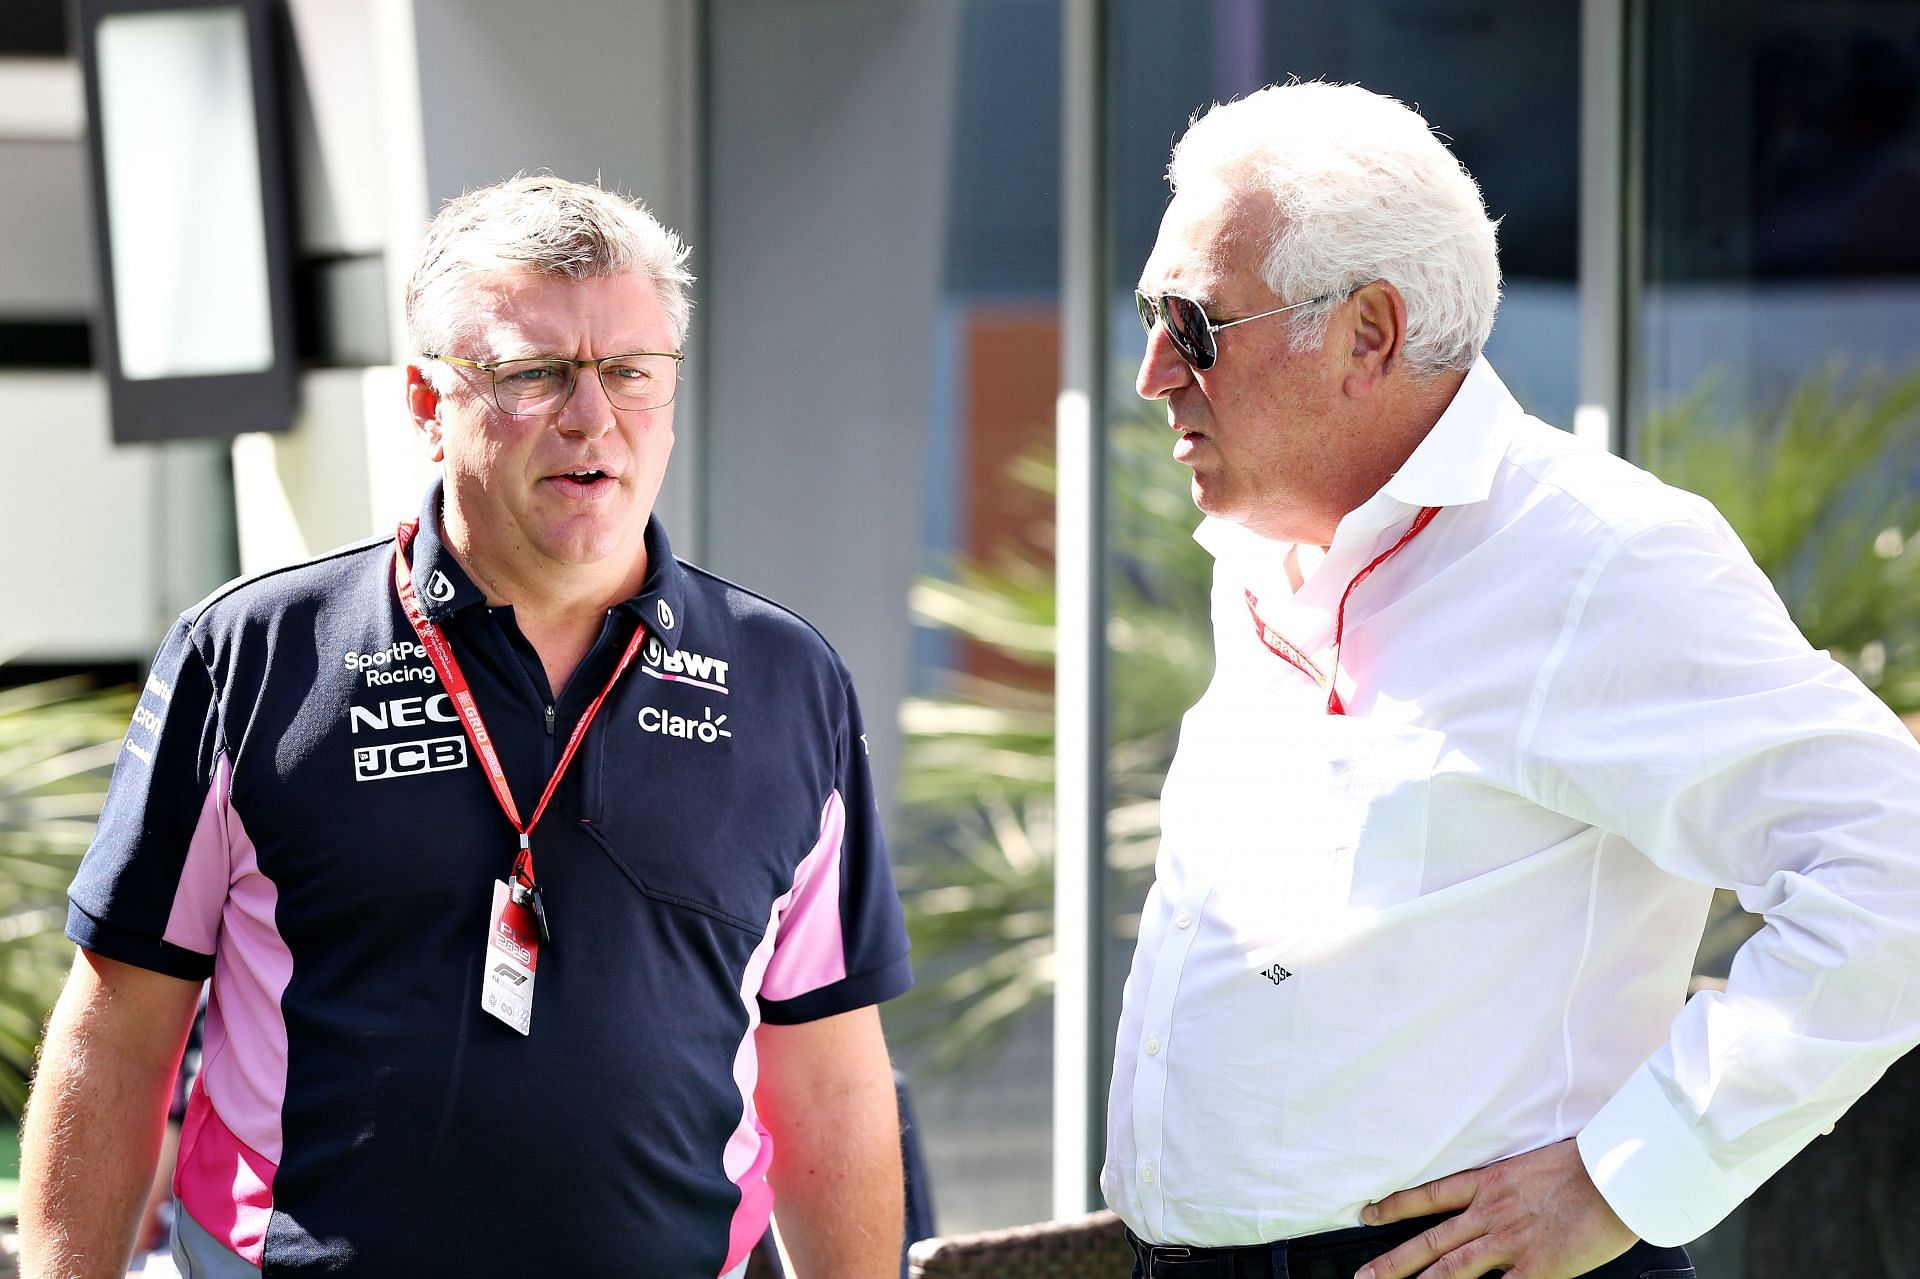 Otmar Szafnauer (left) with Aston Martin owner Lawrence Stroll (right) ahead of the 2019 Russian Grand Prix